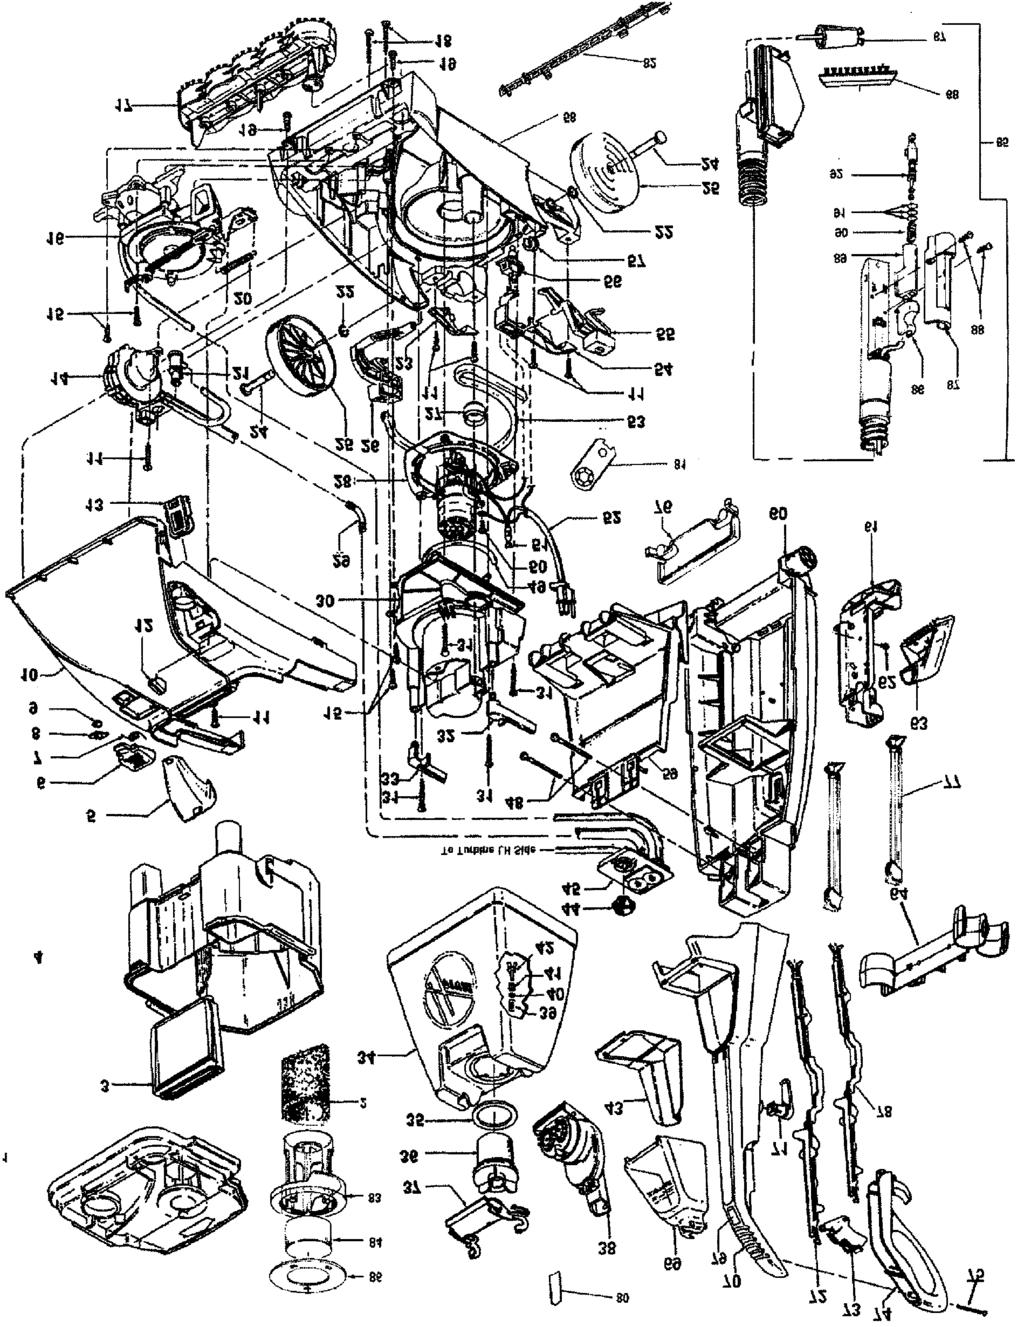 1 ASSEMBLY SCHEMATIC 91 70